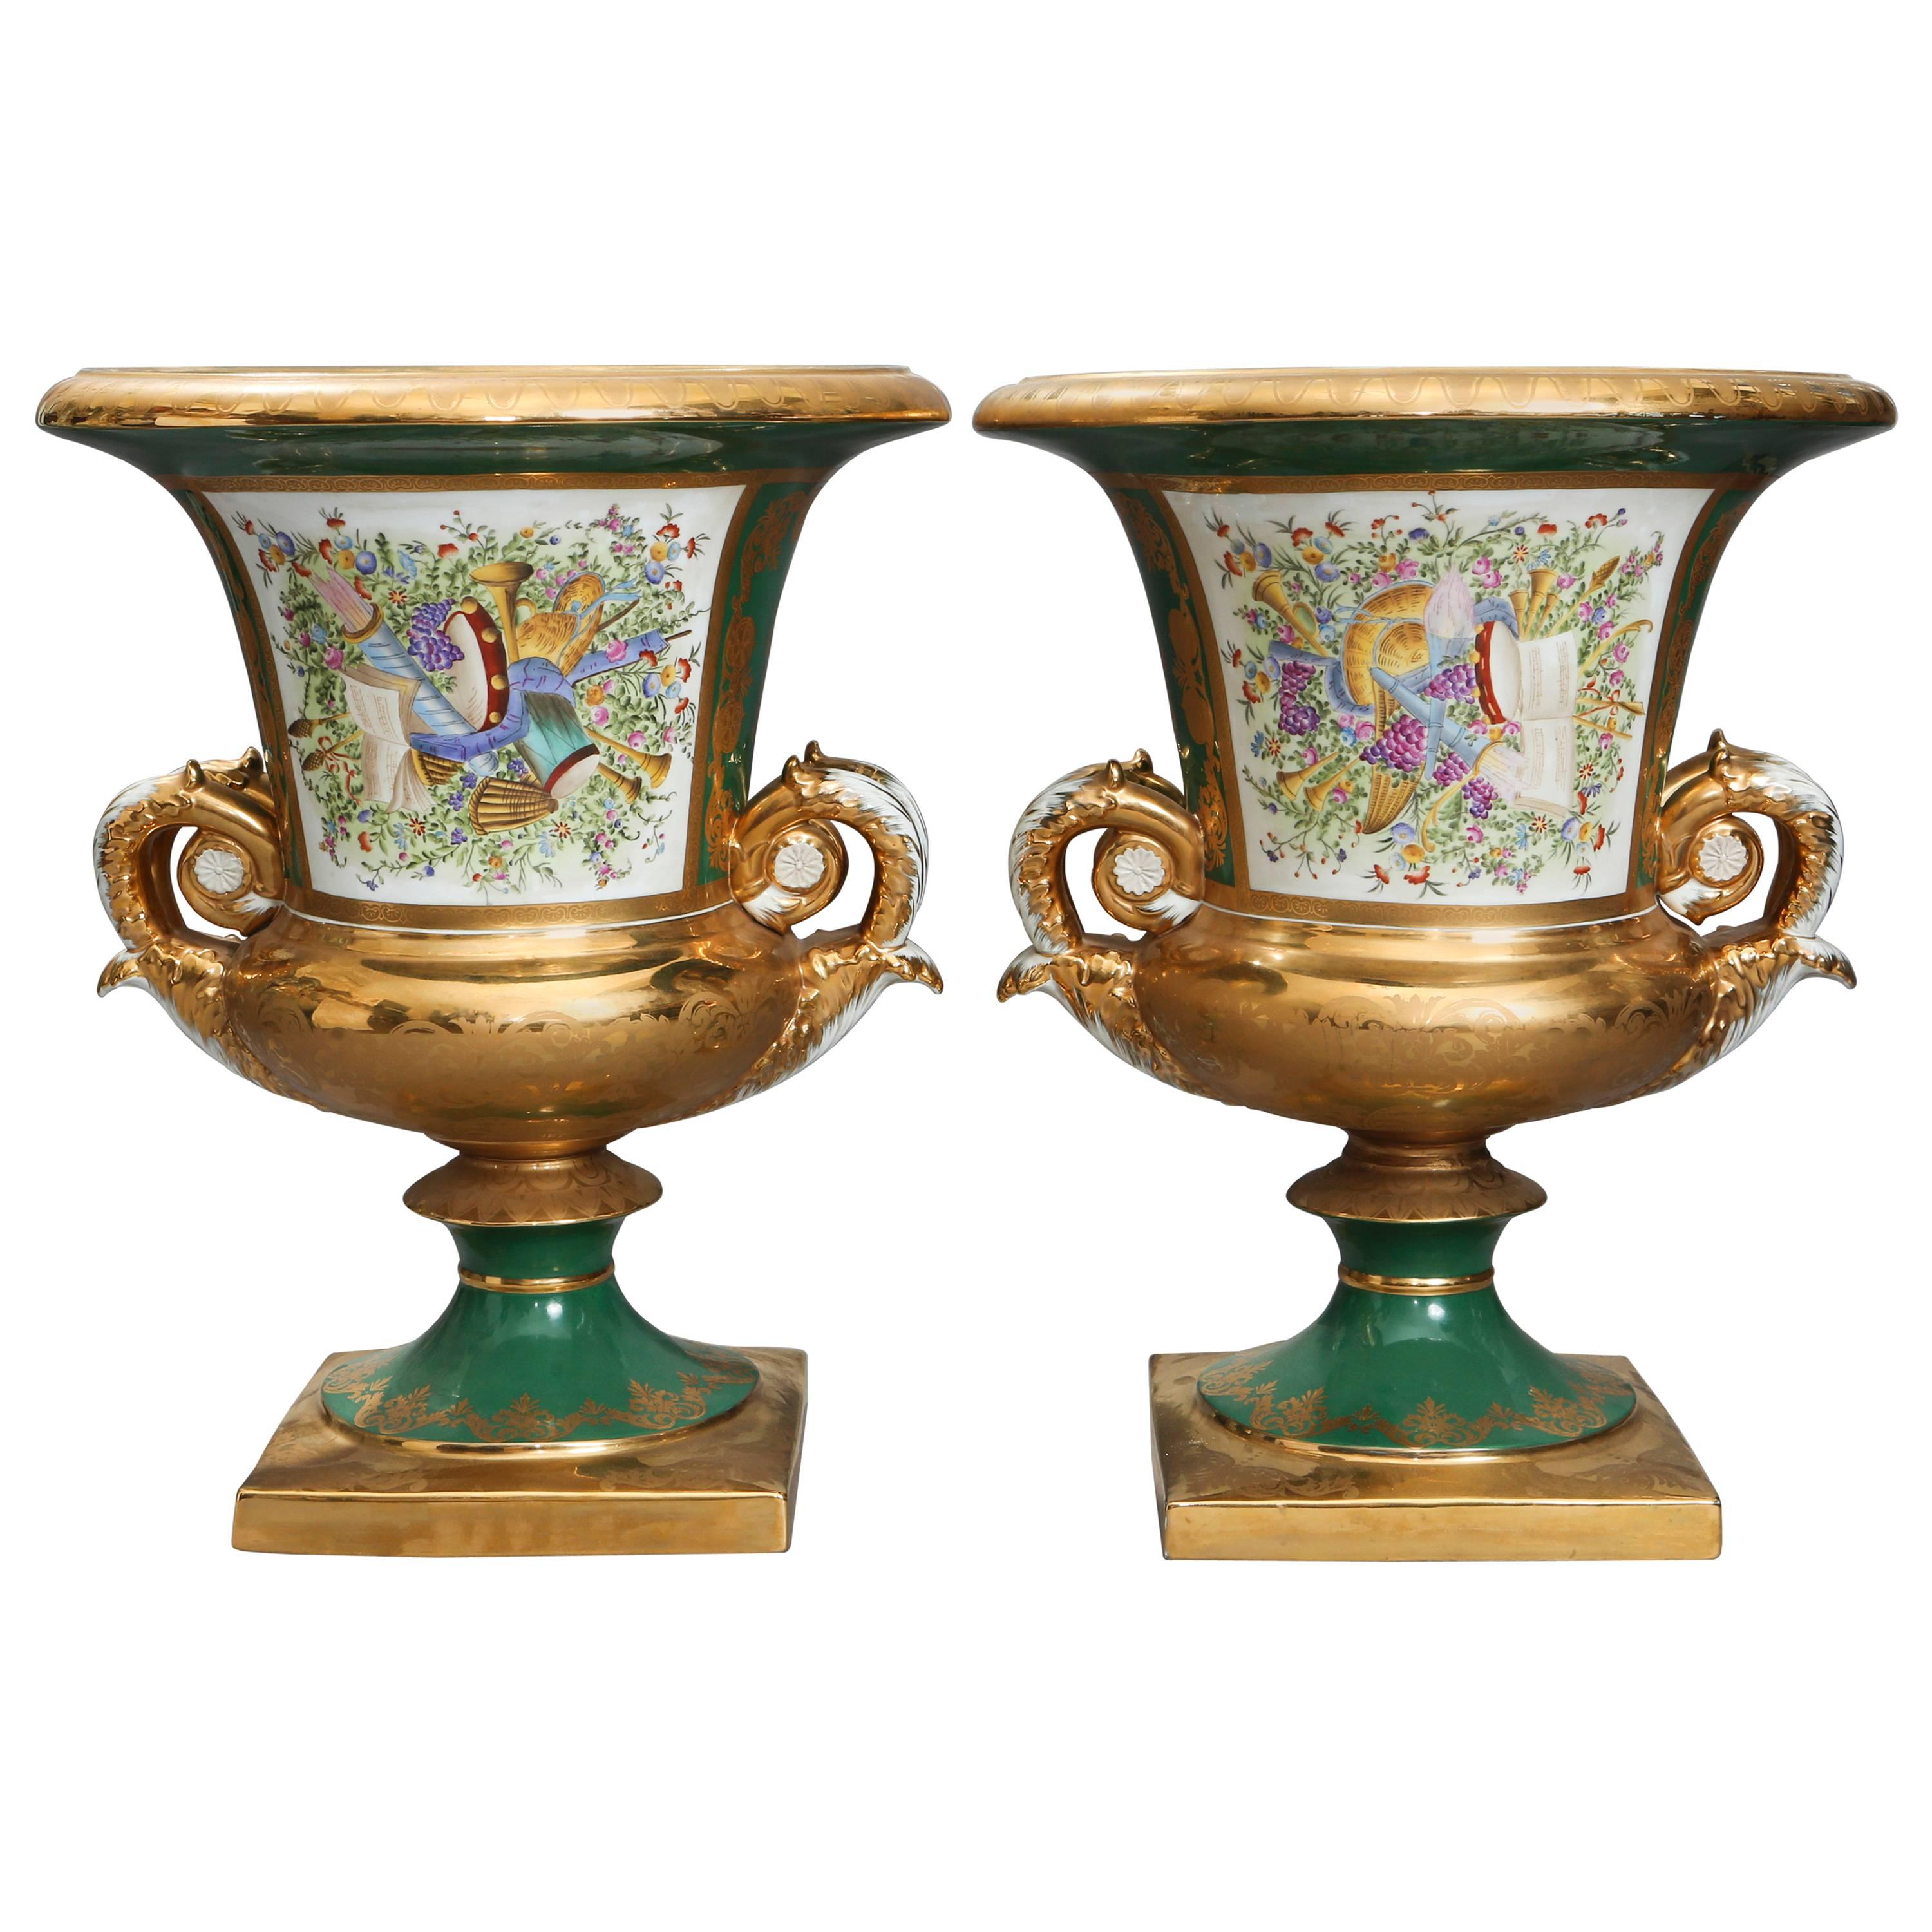 19th Century Pair of Large Russian Gardner Porcelain Campana Urns For Sale